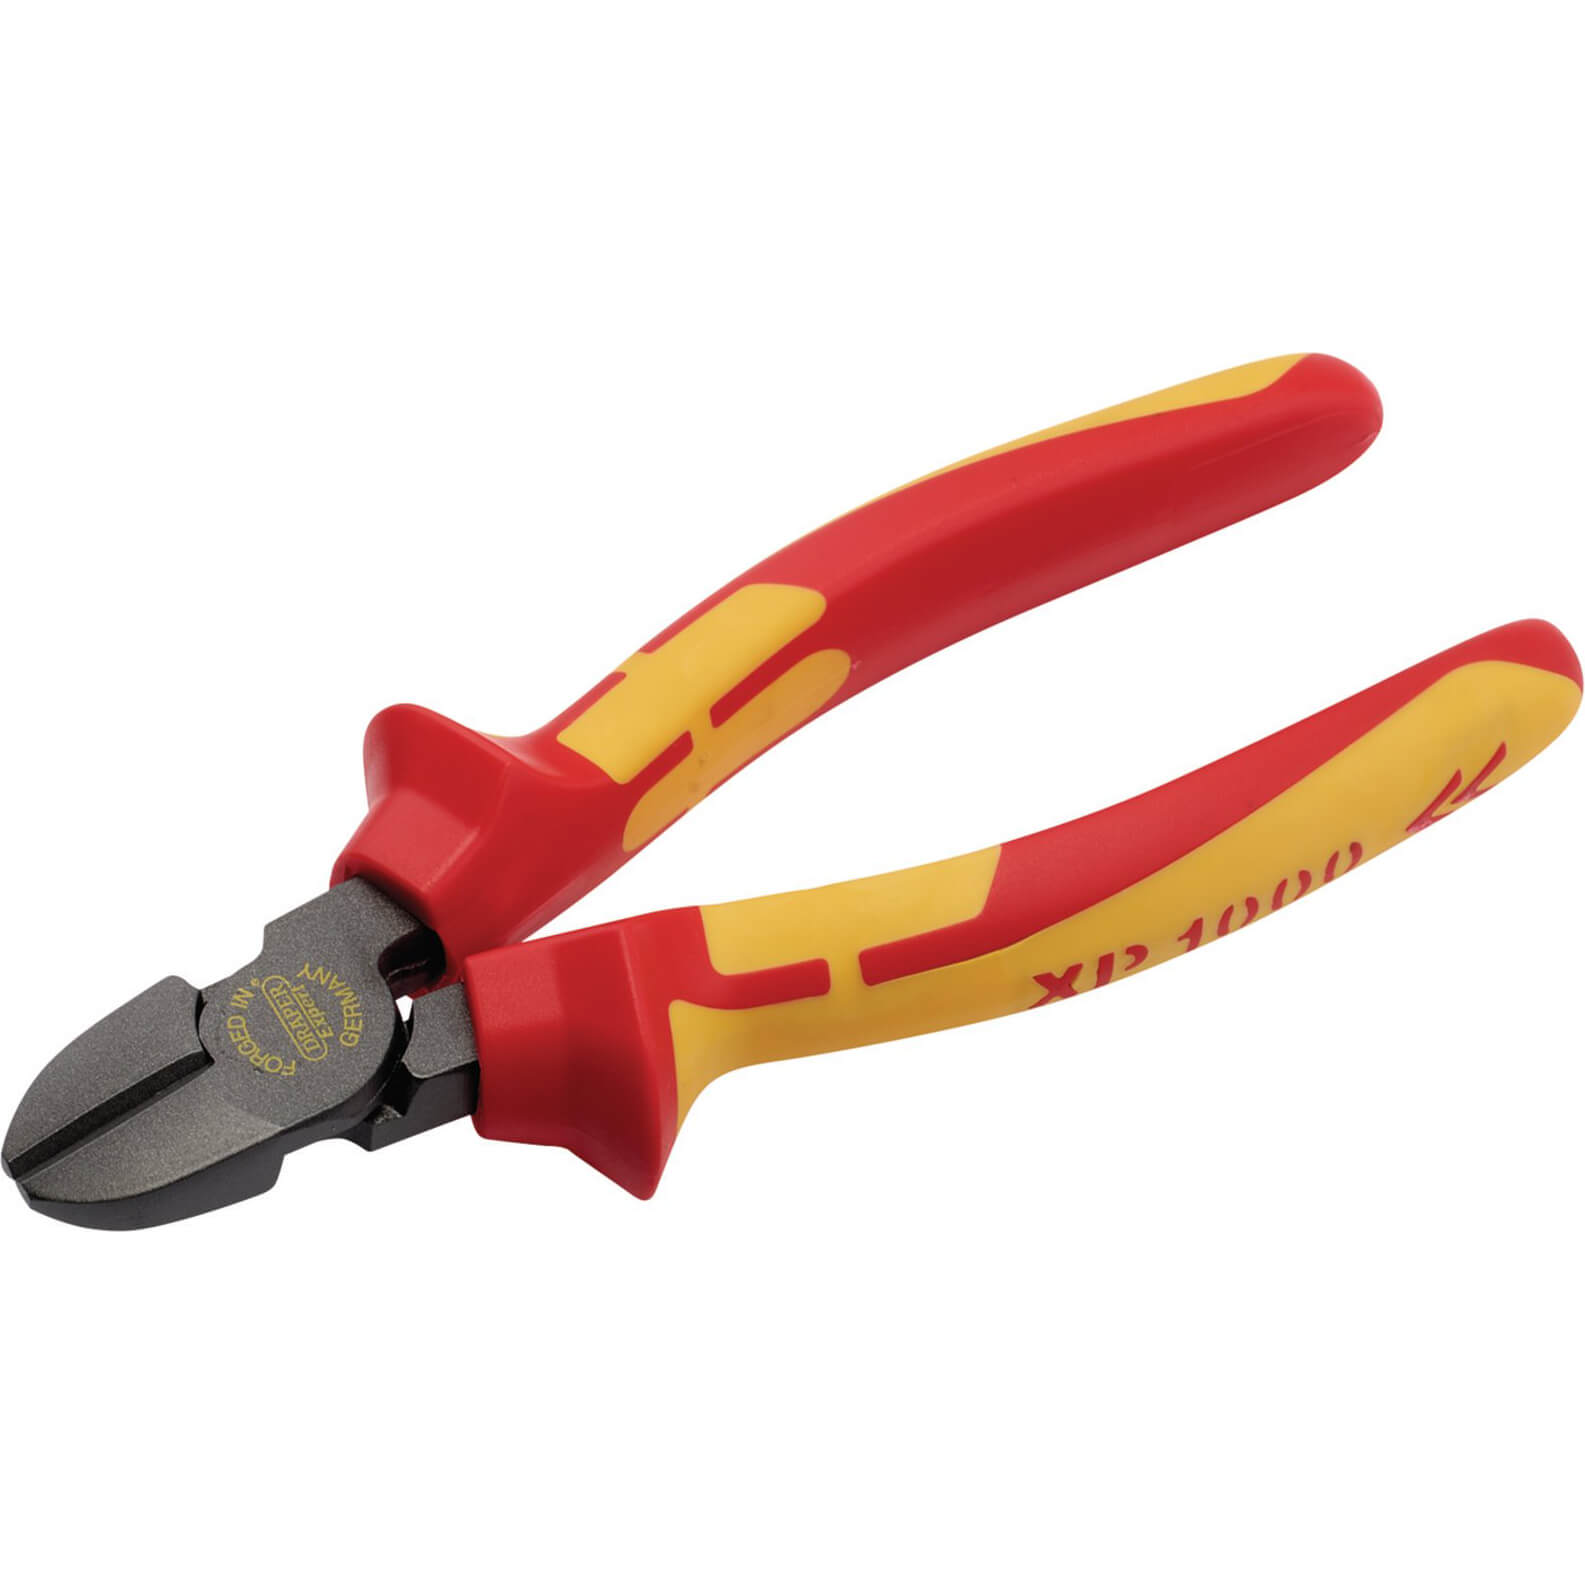 Photo of Draper Xp1000 Vde Insulated High Leverage Side Cutters 160mm